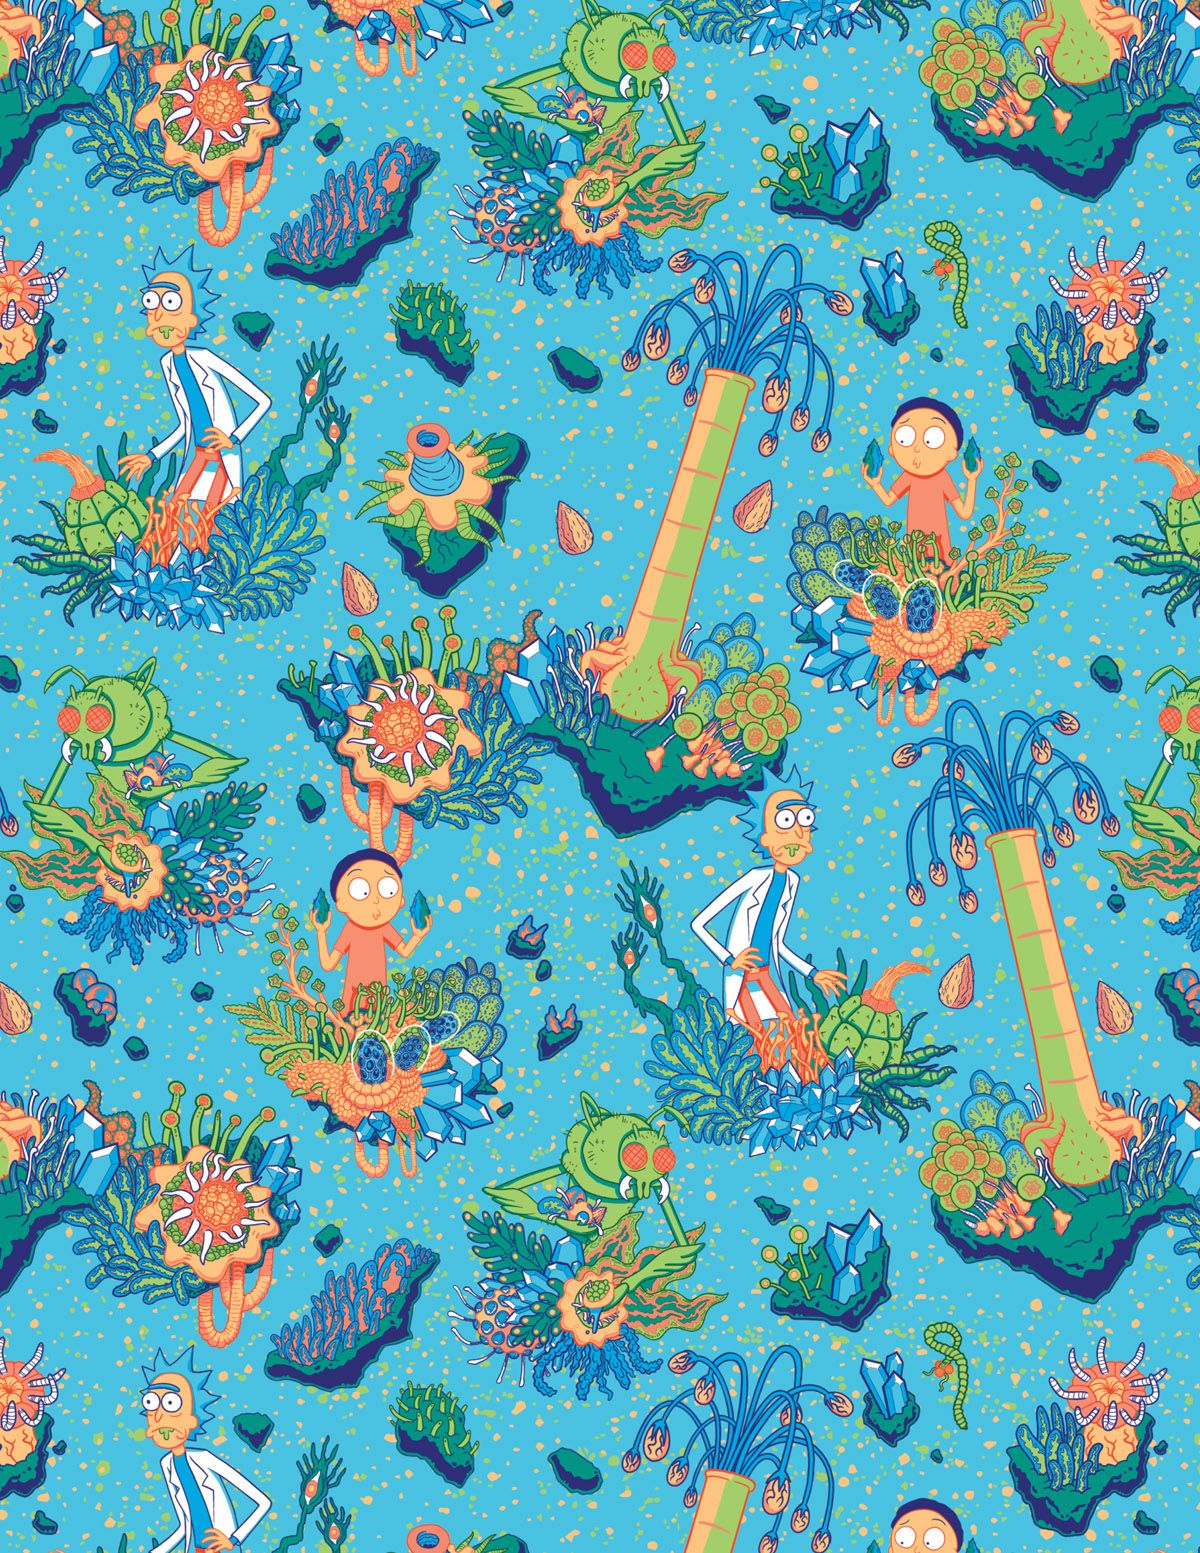 Rick and Morty Lootcrate Towel Pattern